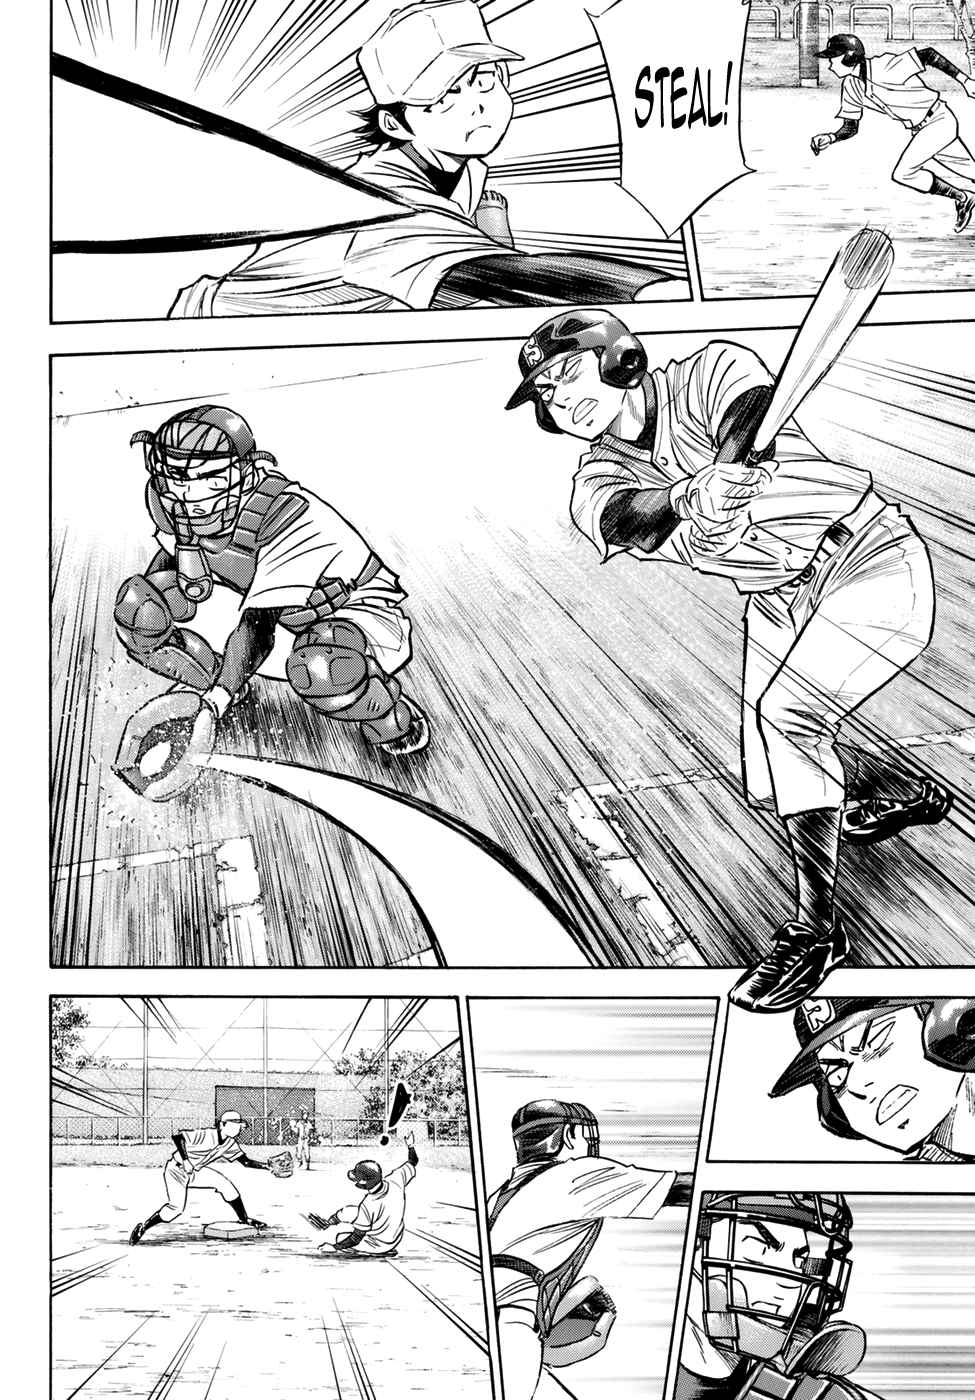 Diamond no Ace Act II Vol. 7 Ch. 62 Real Practice